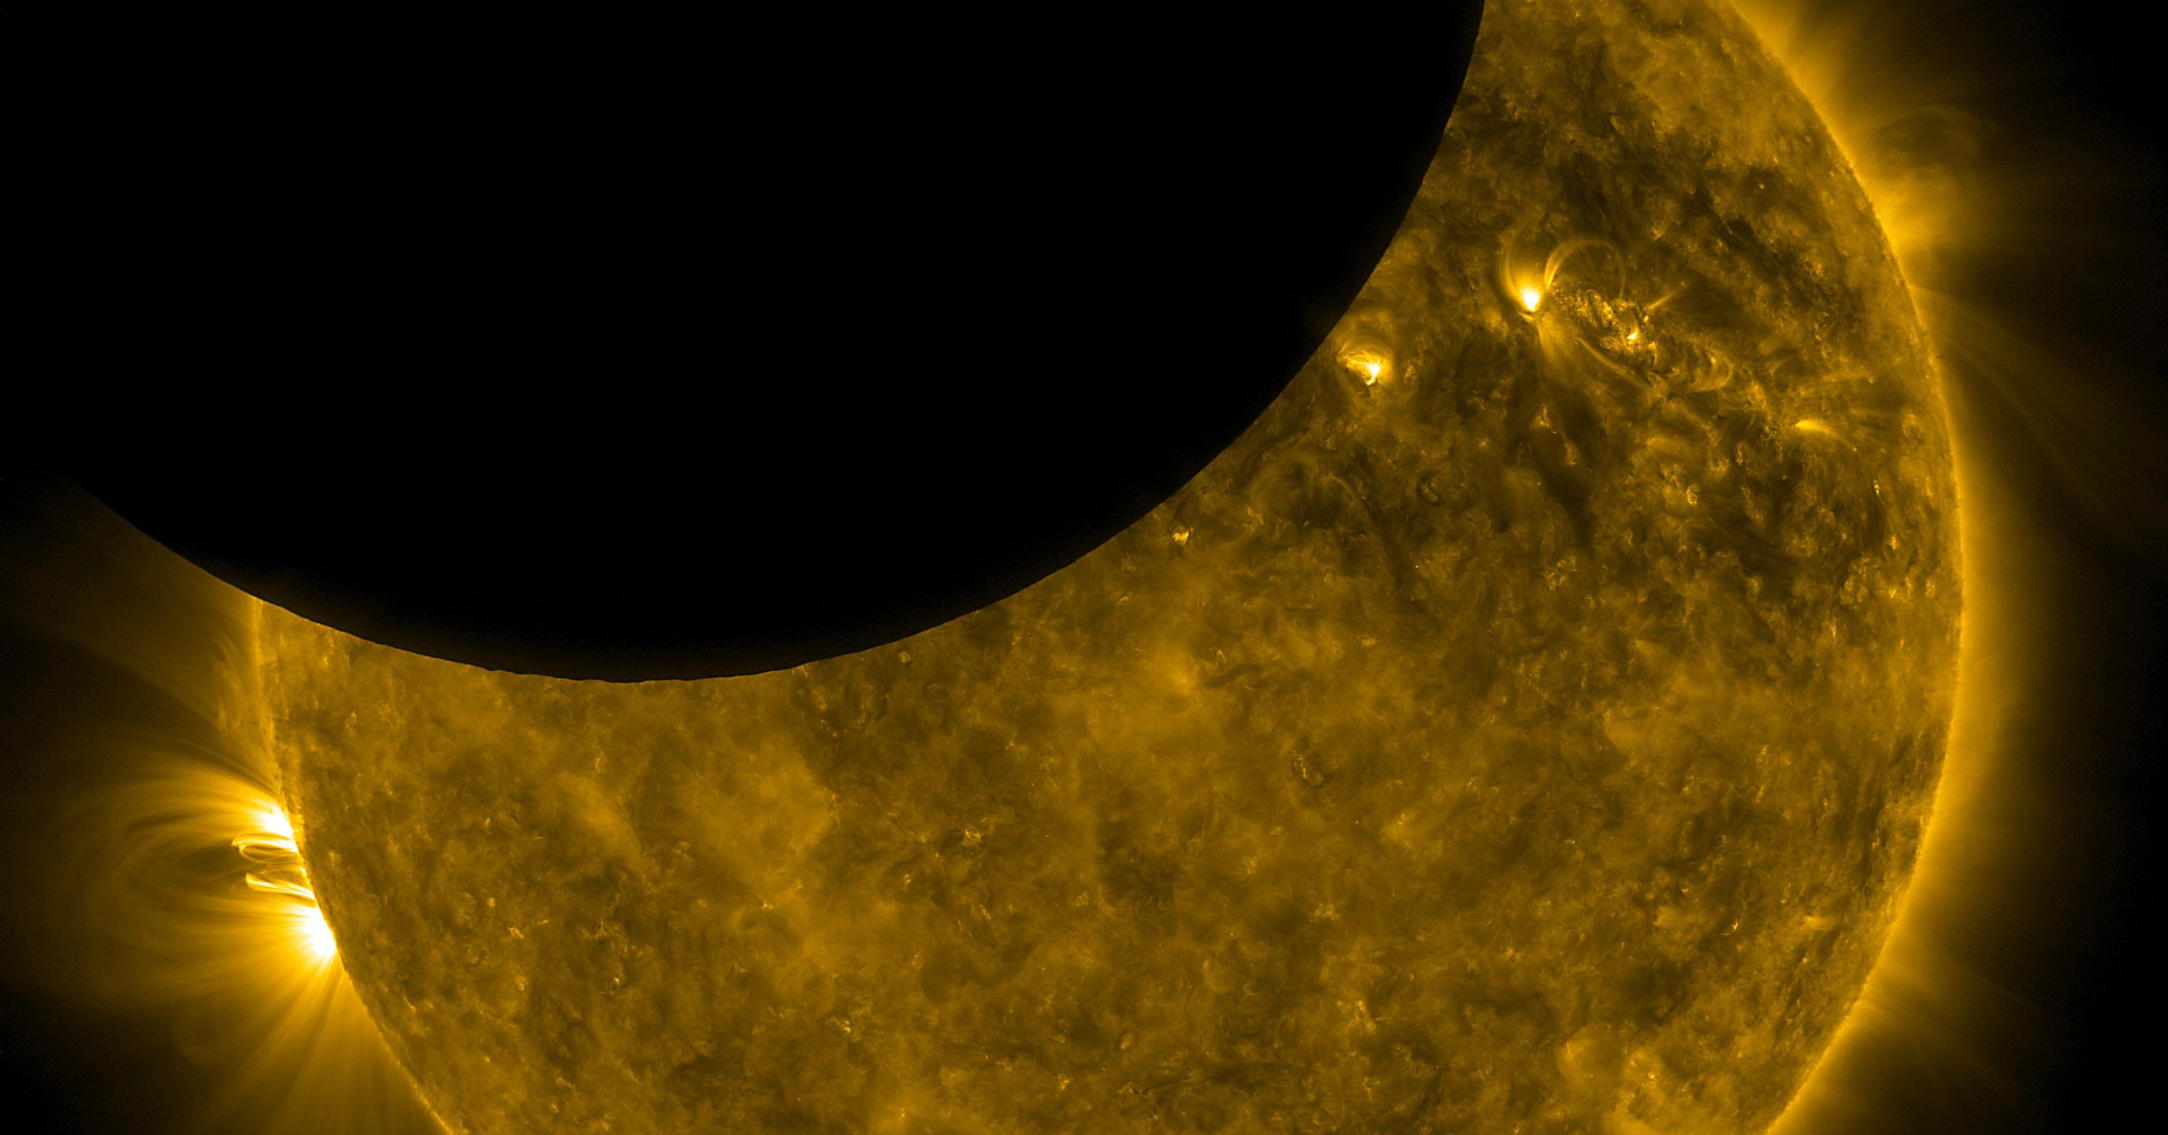 SDO lunar transit: On Oct. 7, 2010, NASA’s Solar Dynamics Observatory observed its first lunar transit when the new moon passed directly between the spacecraft (in its geosynchronous orbit) and the sun. With SDO watching the sun in a wavelength of extreme ultraviolet light, the dark moon created a partial eclipse of the sun.; The Moon; solar eclipse; the sun